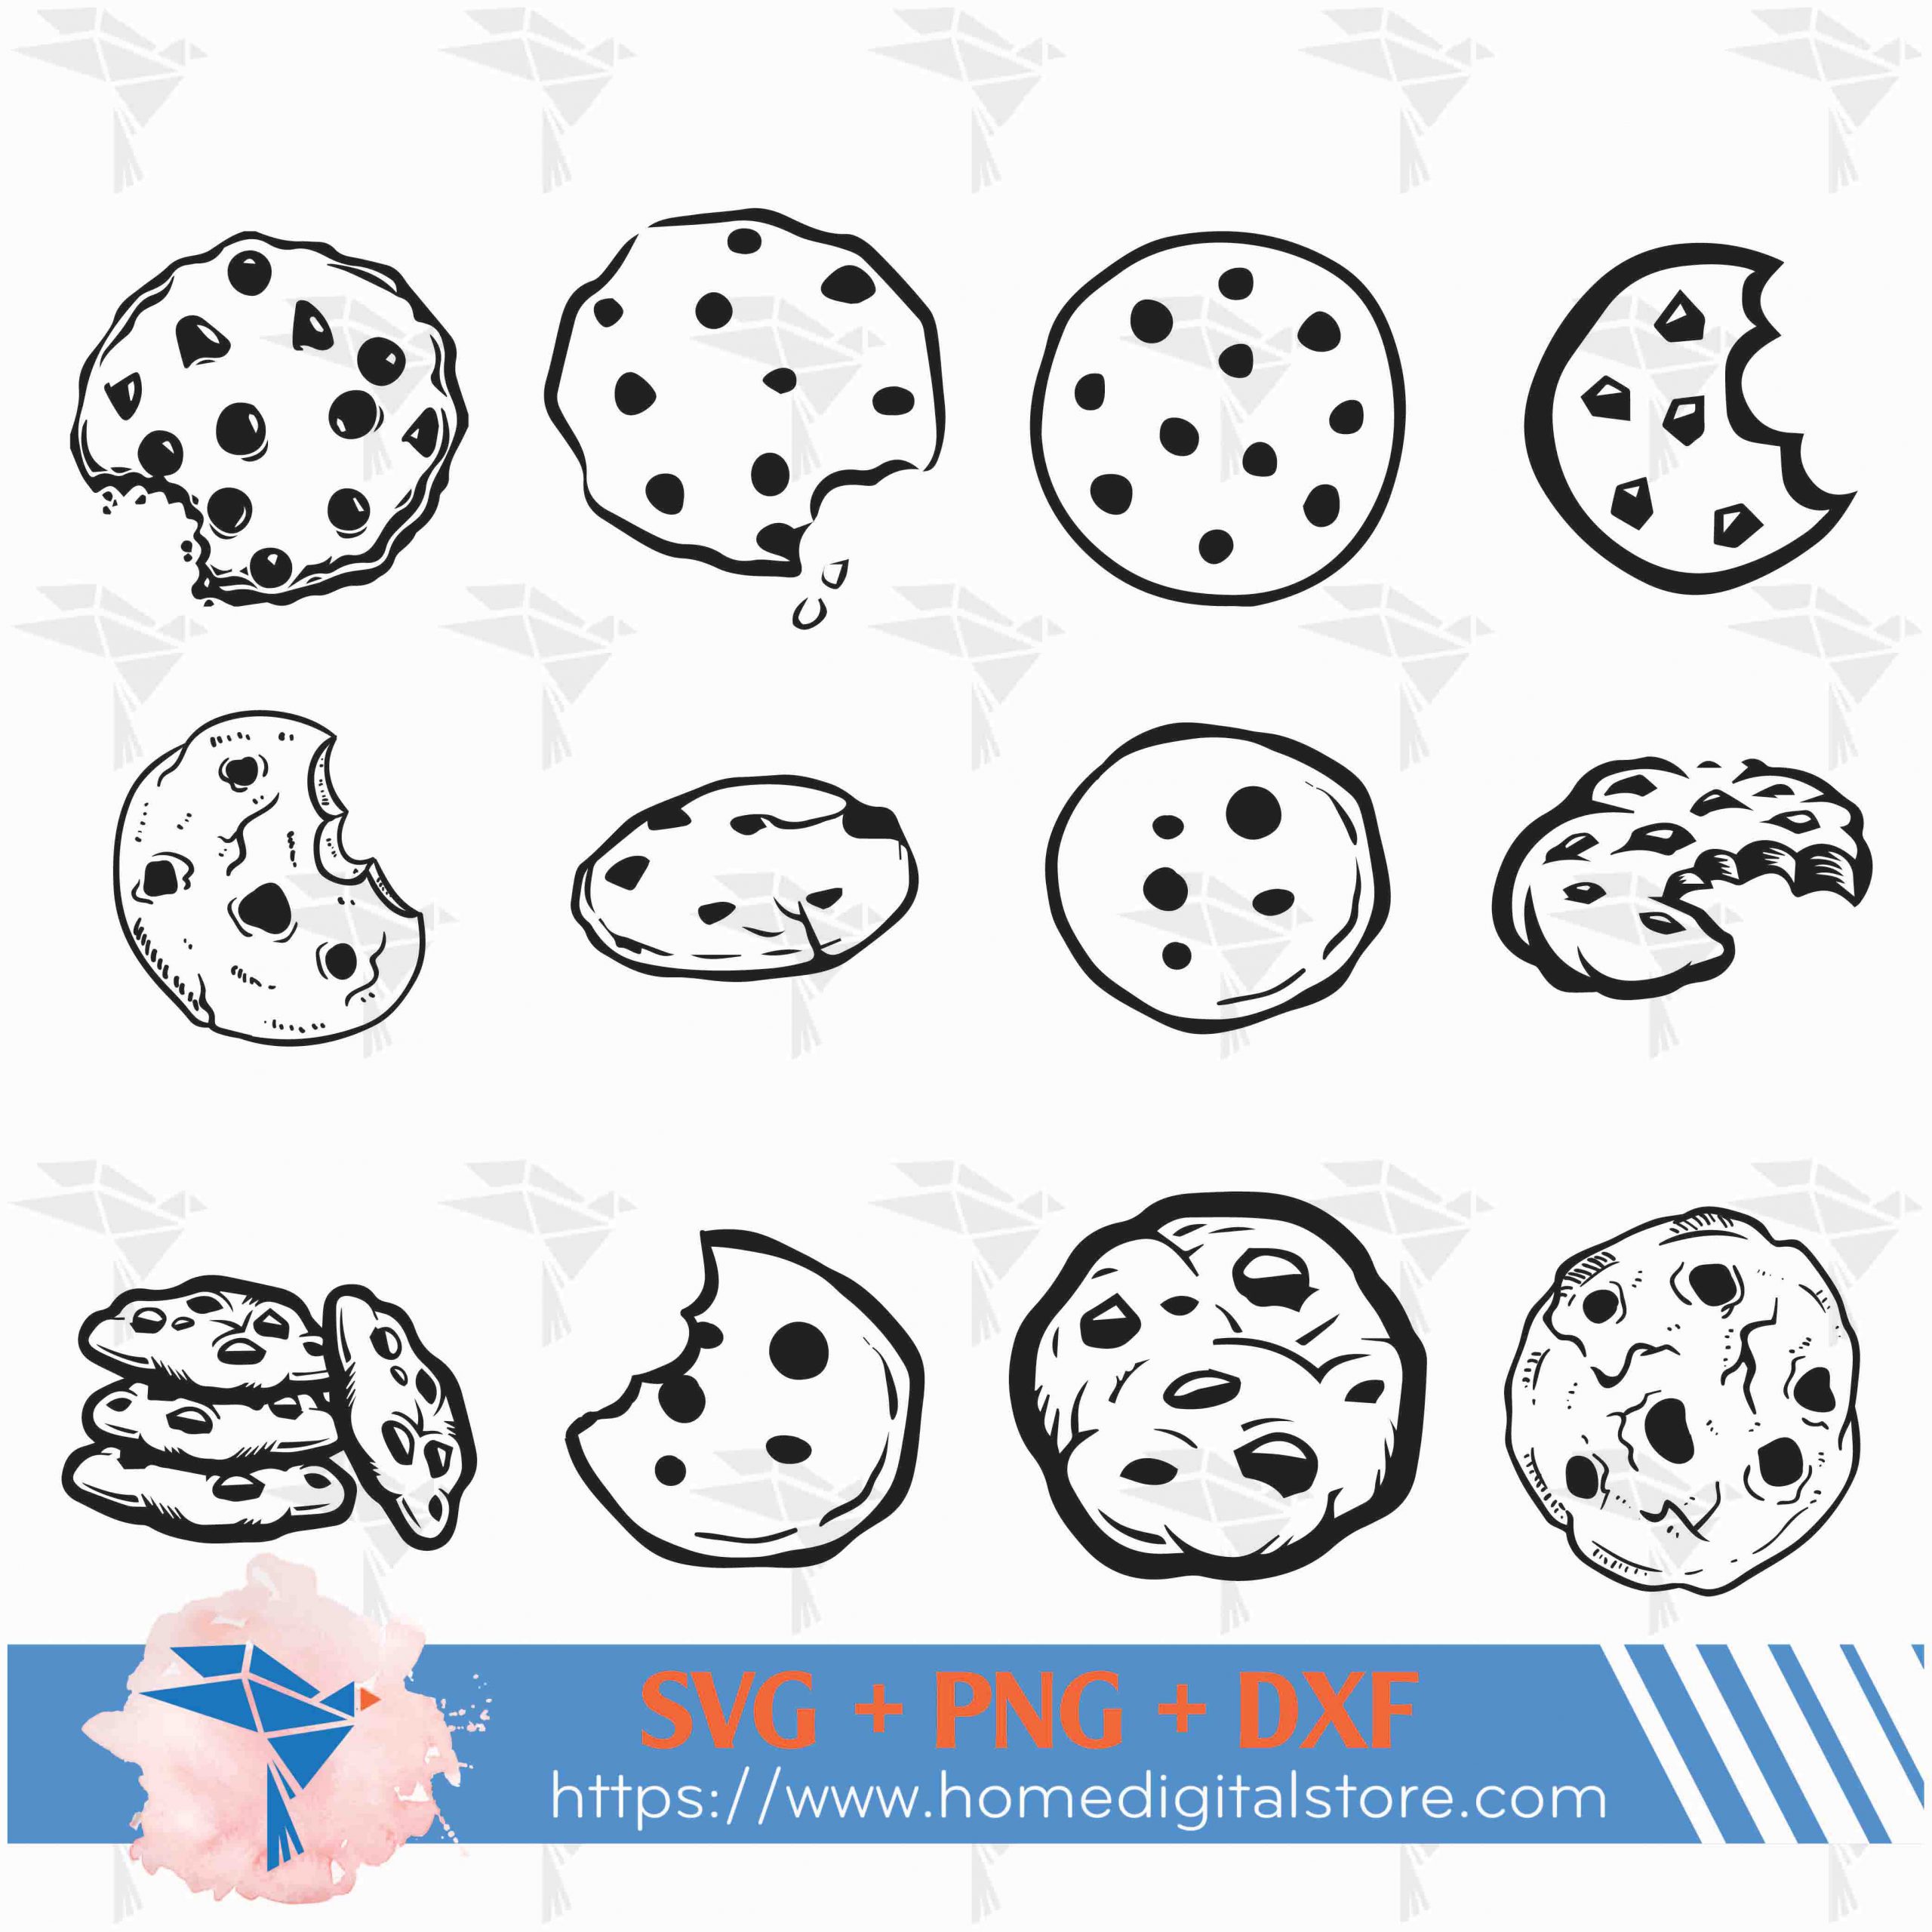 Cookie Monster SVG, PNG, DXF Instant download files for Cricut Design  Space, Silhouette, Cutting, Printing, or more